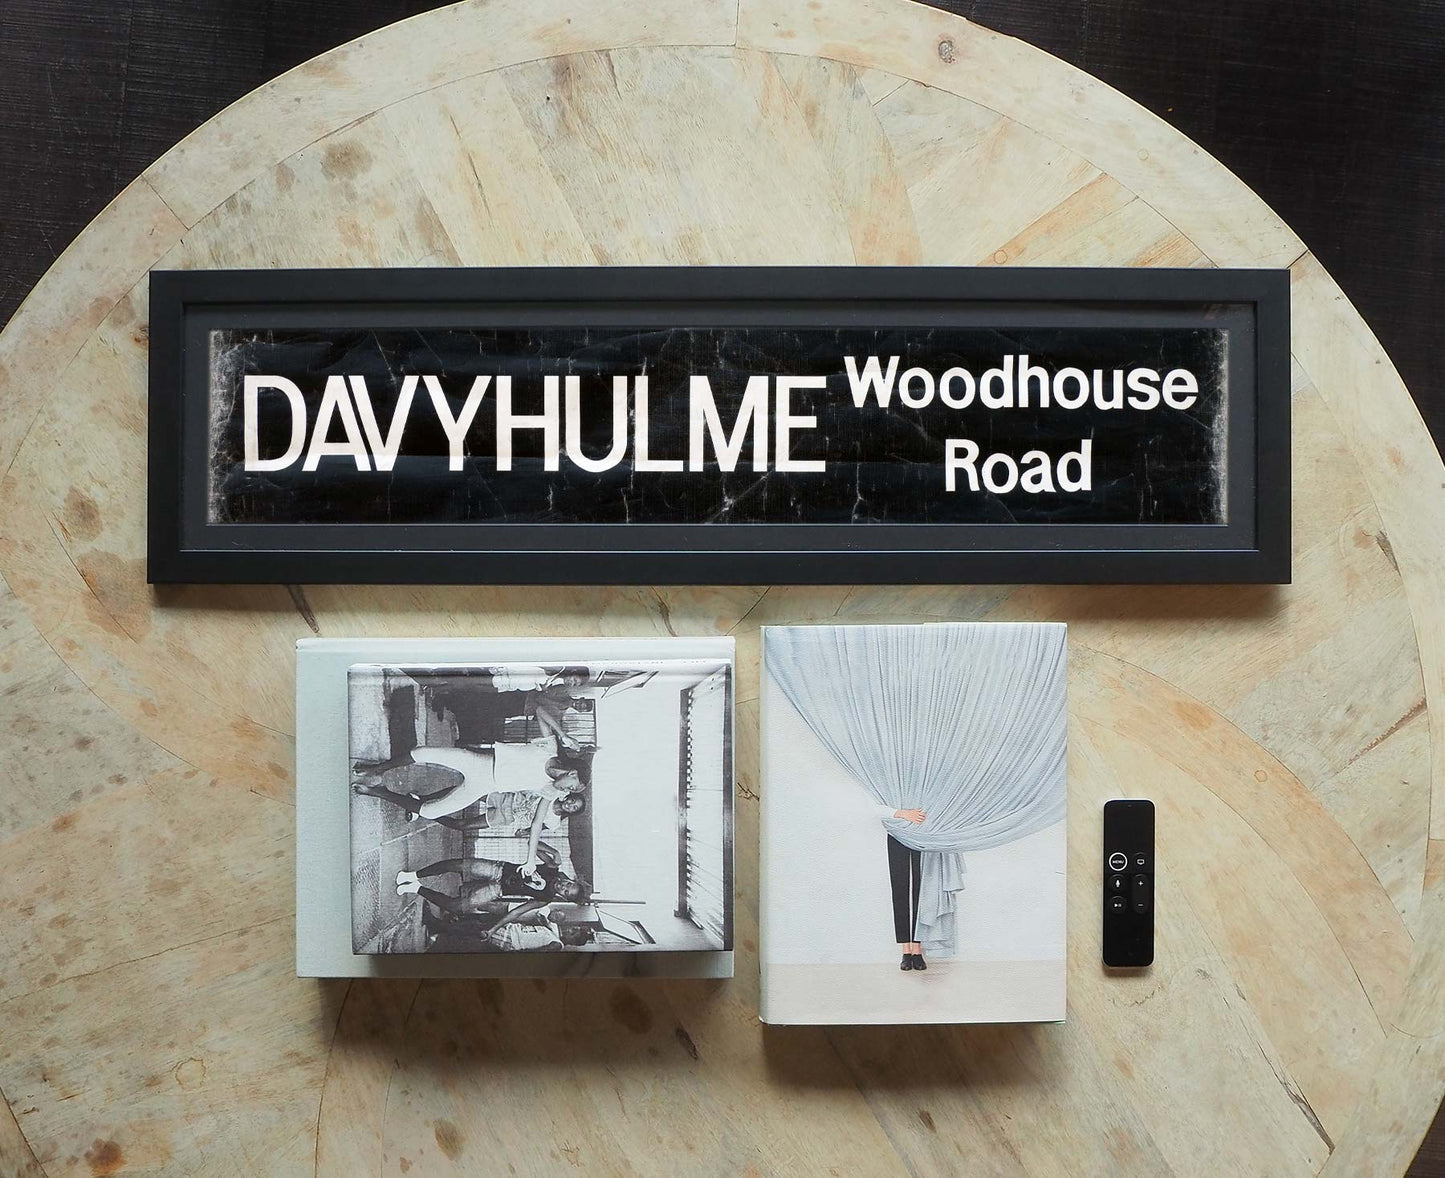 Davyhulme Woodhouse Road Framed Bus Blind